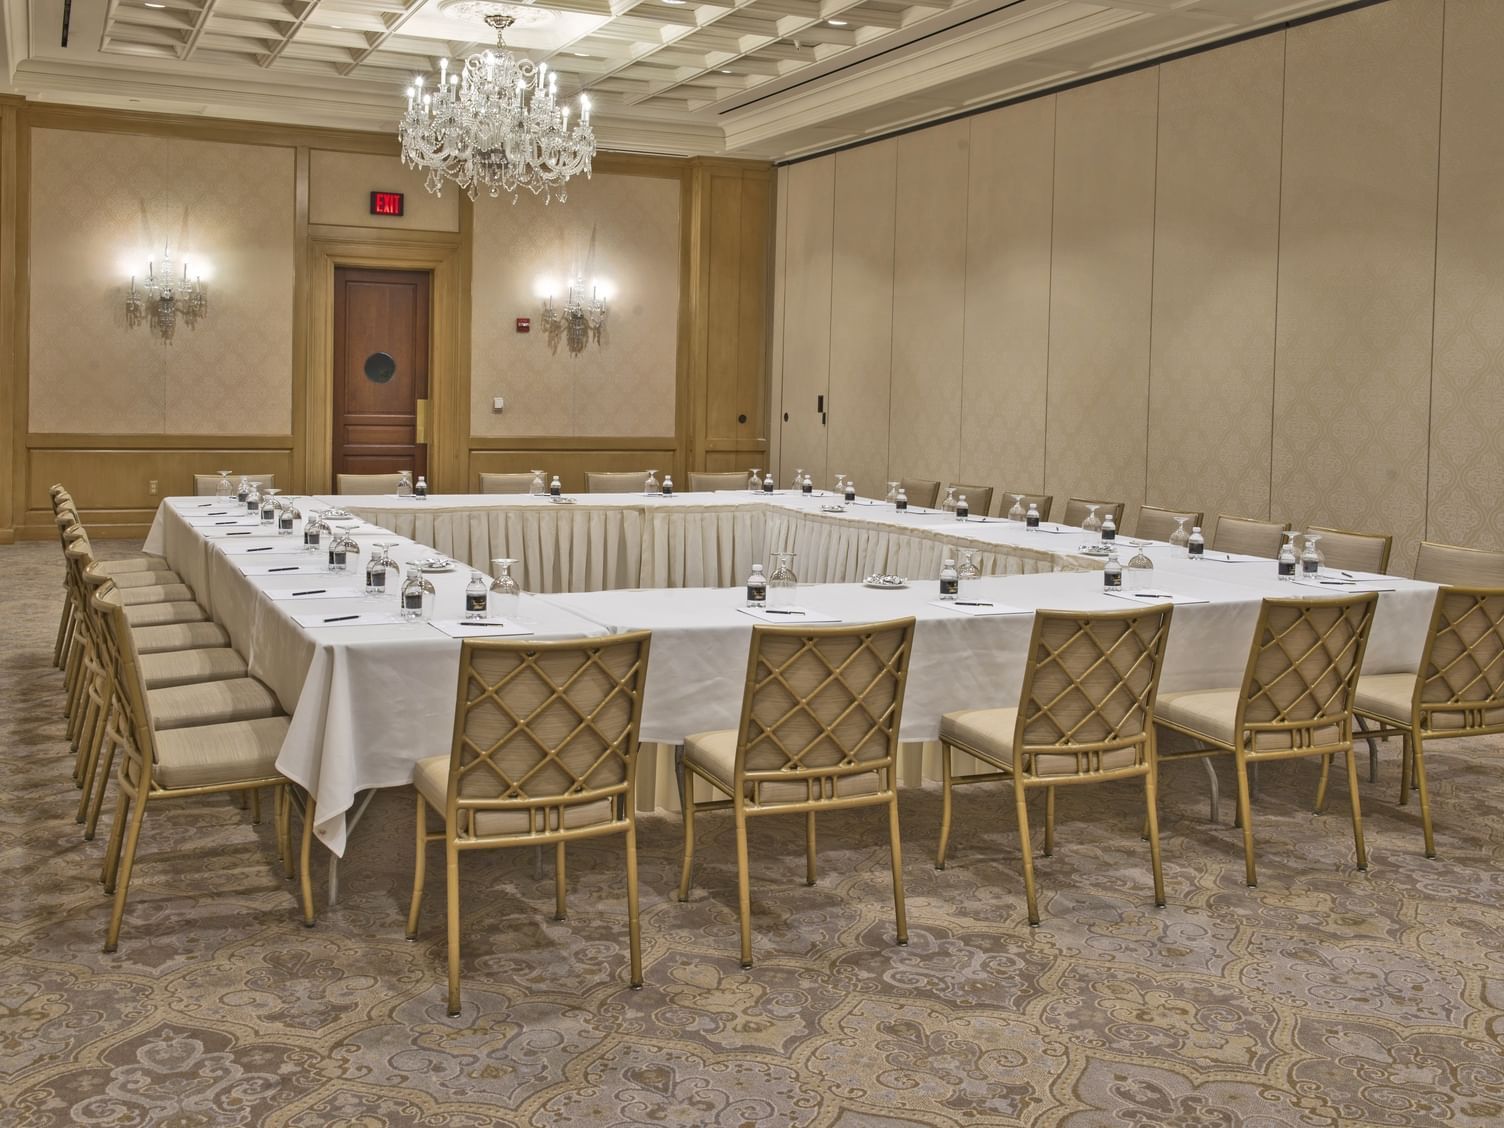 Boardroom-style table layout in Salon III at The Townsend Hotel